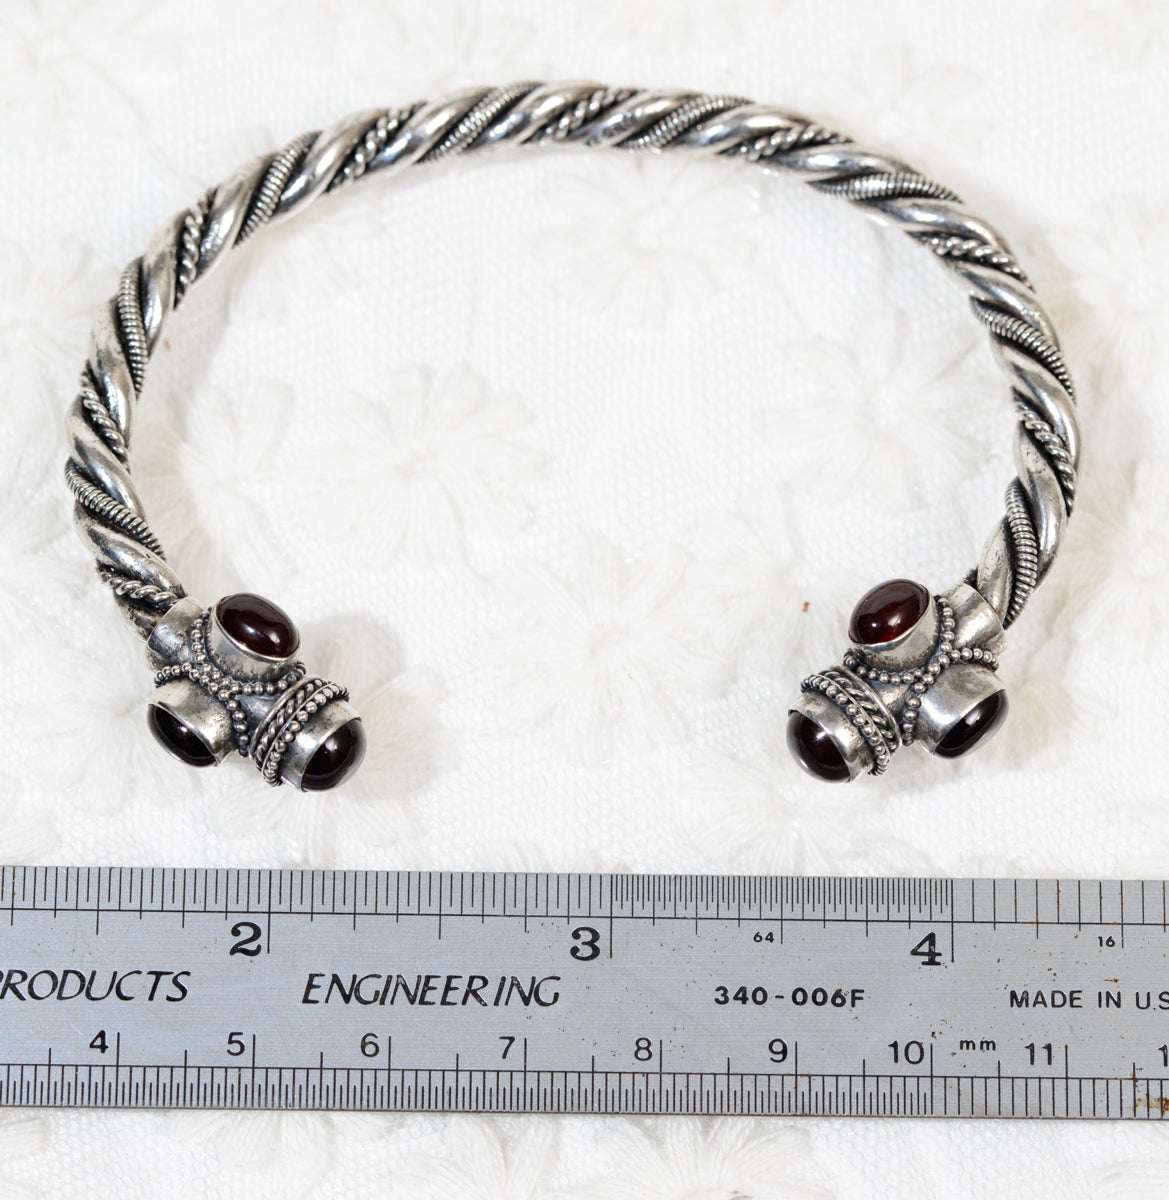 Vintage Sterling Silver Twisted Torque Bangle With Garnet Cabochons (A1934)